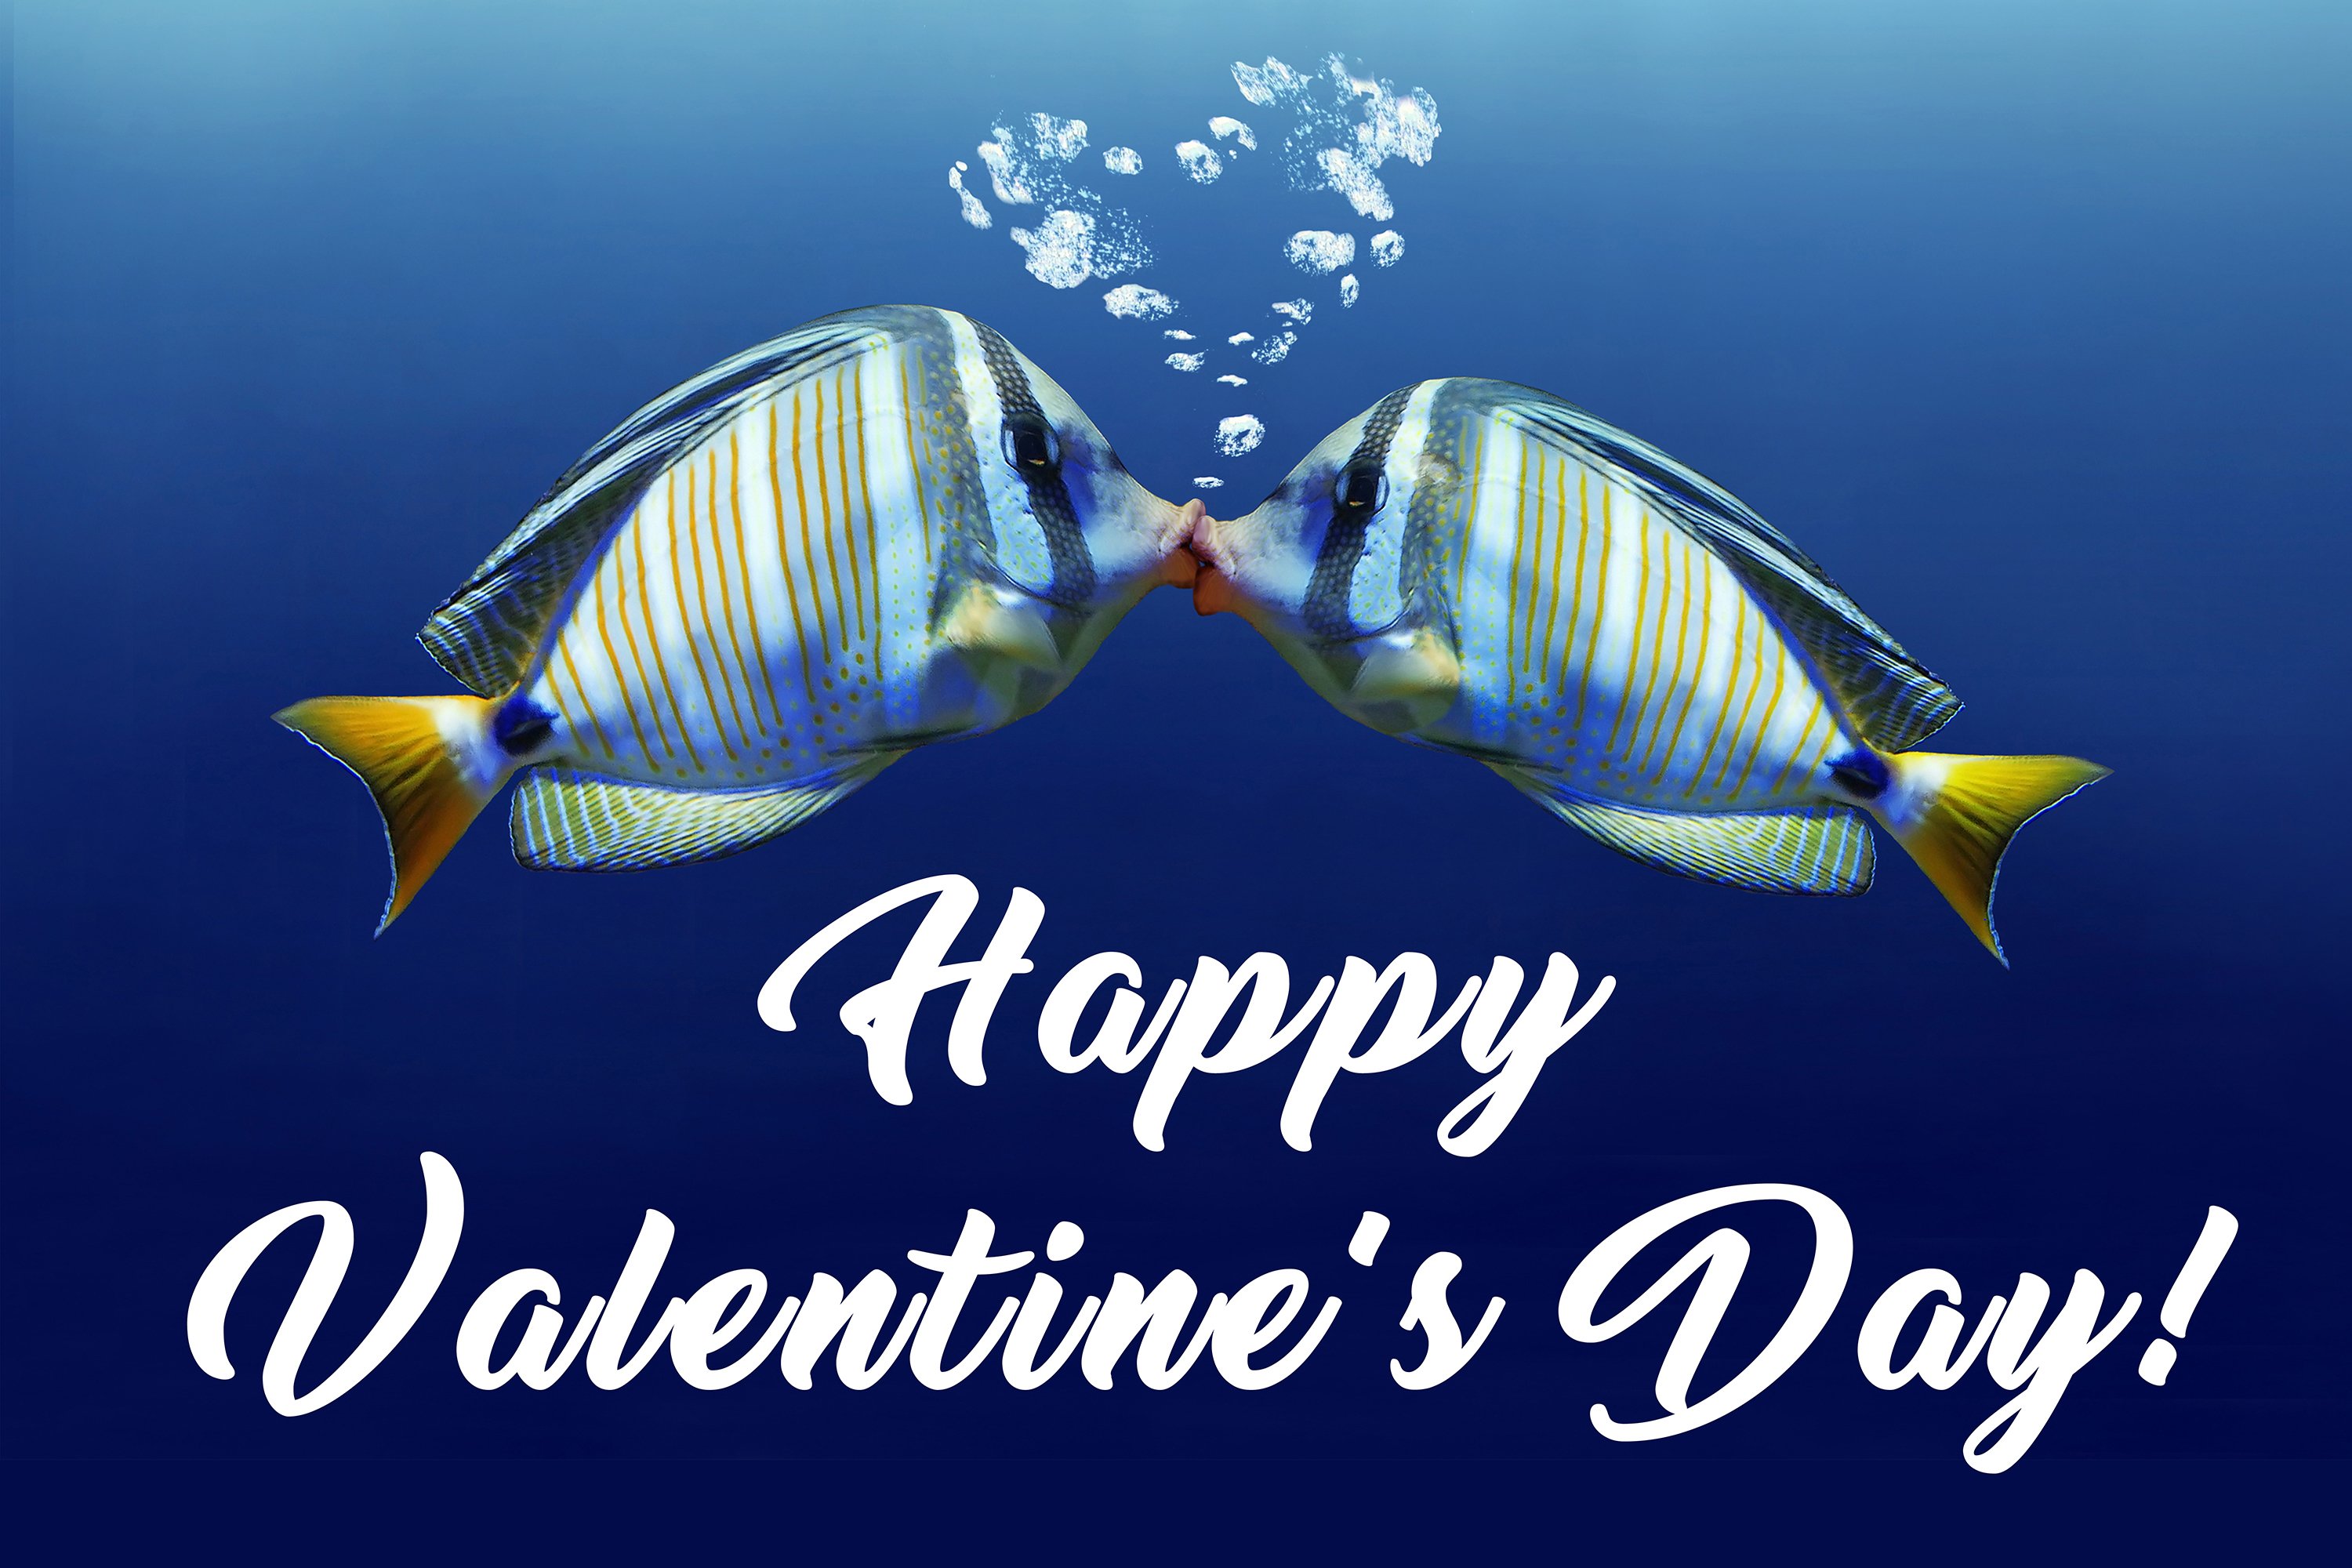 Ripley's Aquarium of Canada on X: Whether you're hooked or still fishing,  Happy Valentine's Day from our family to yours!  / X